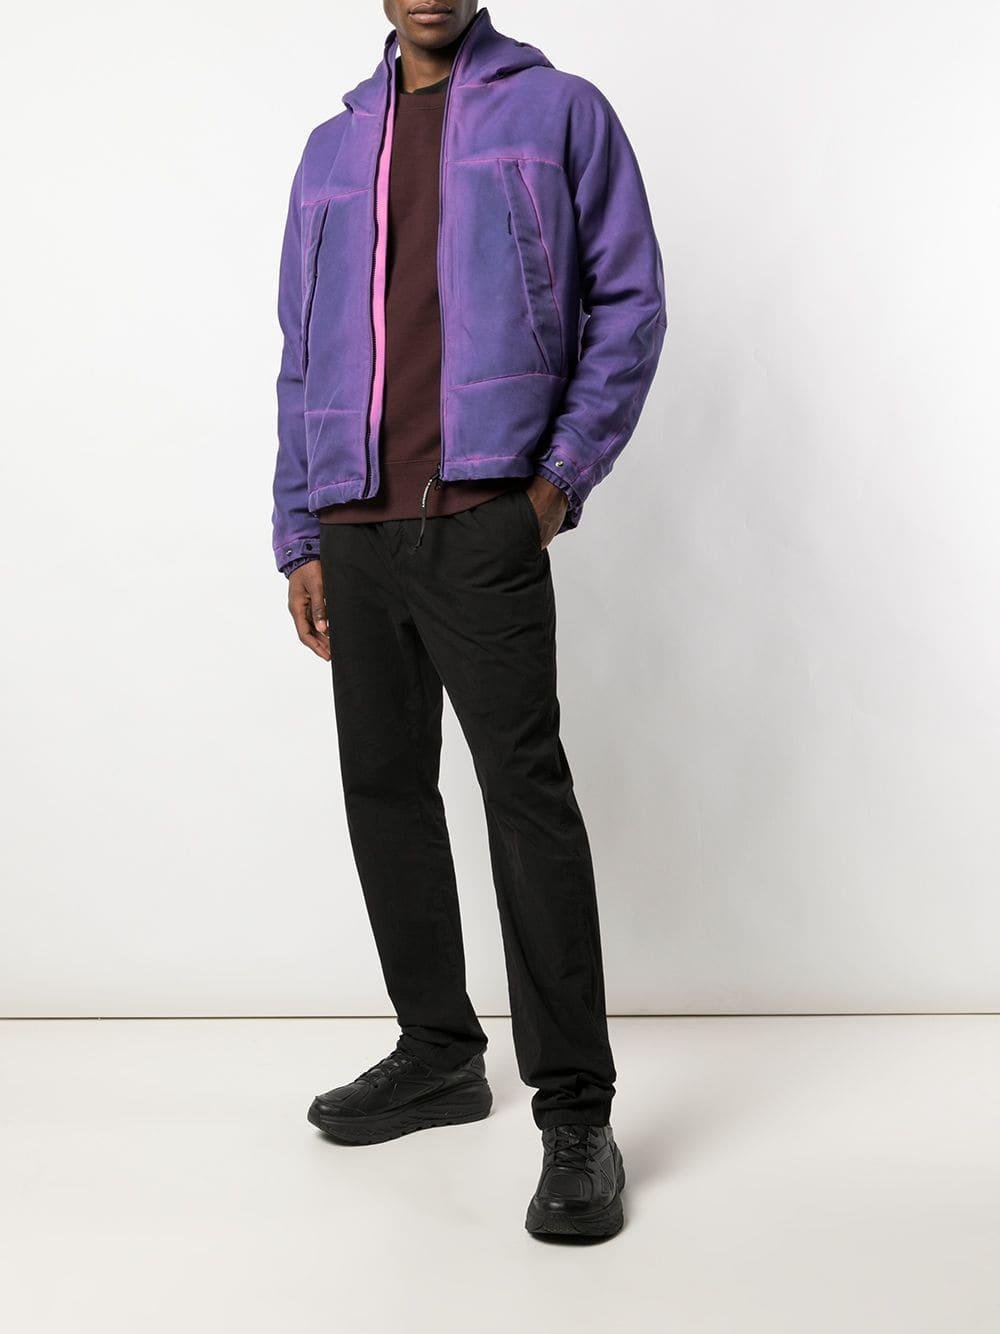 C.P. Company 'military' Jacket in Purple for Men | Lyst Canada